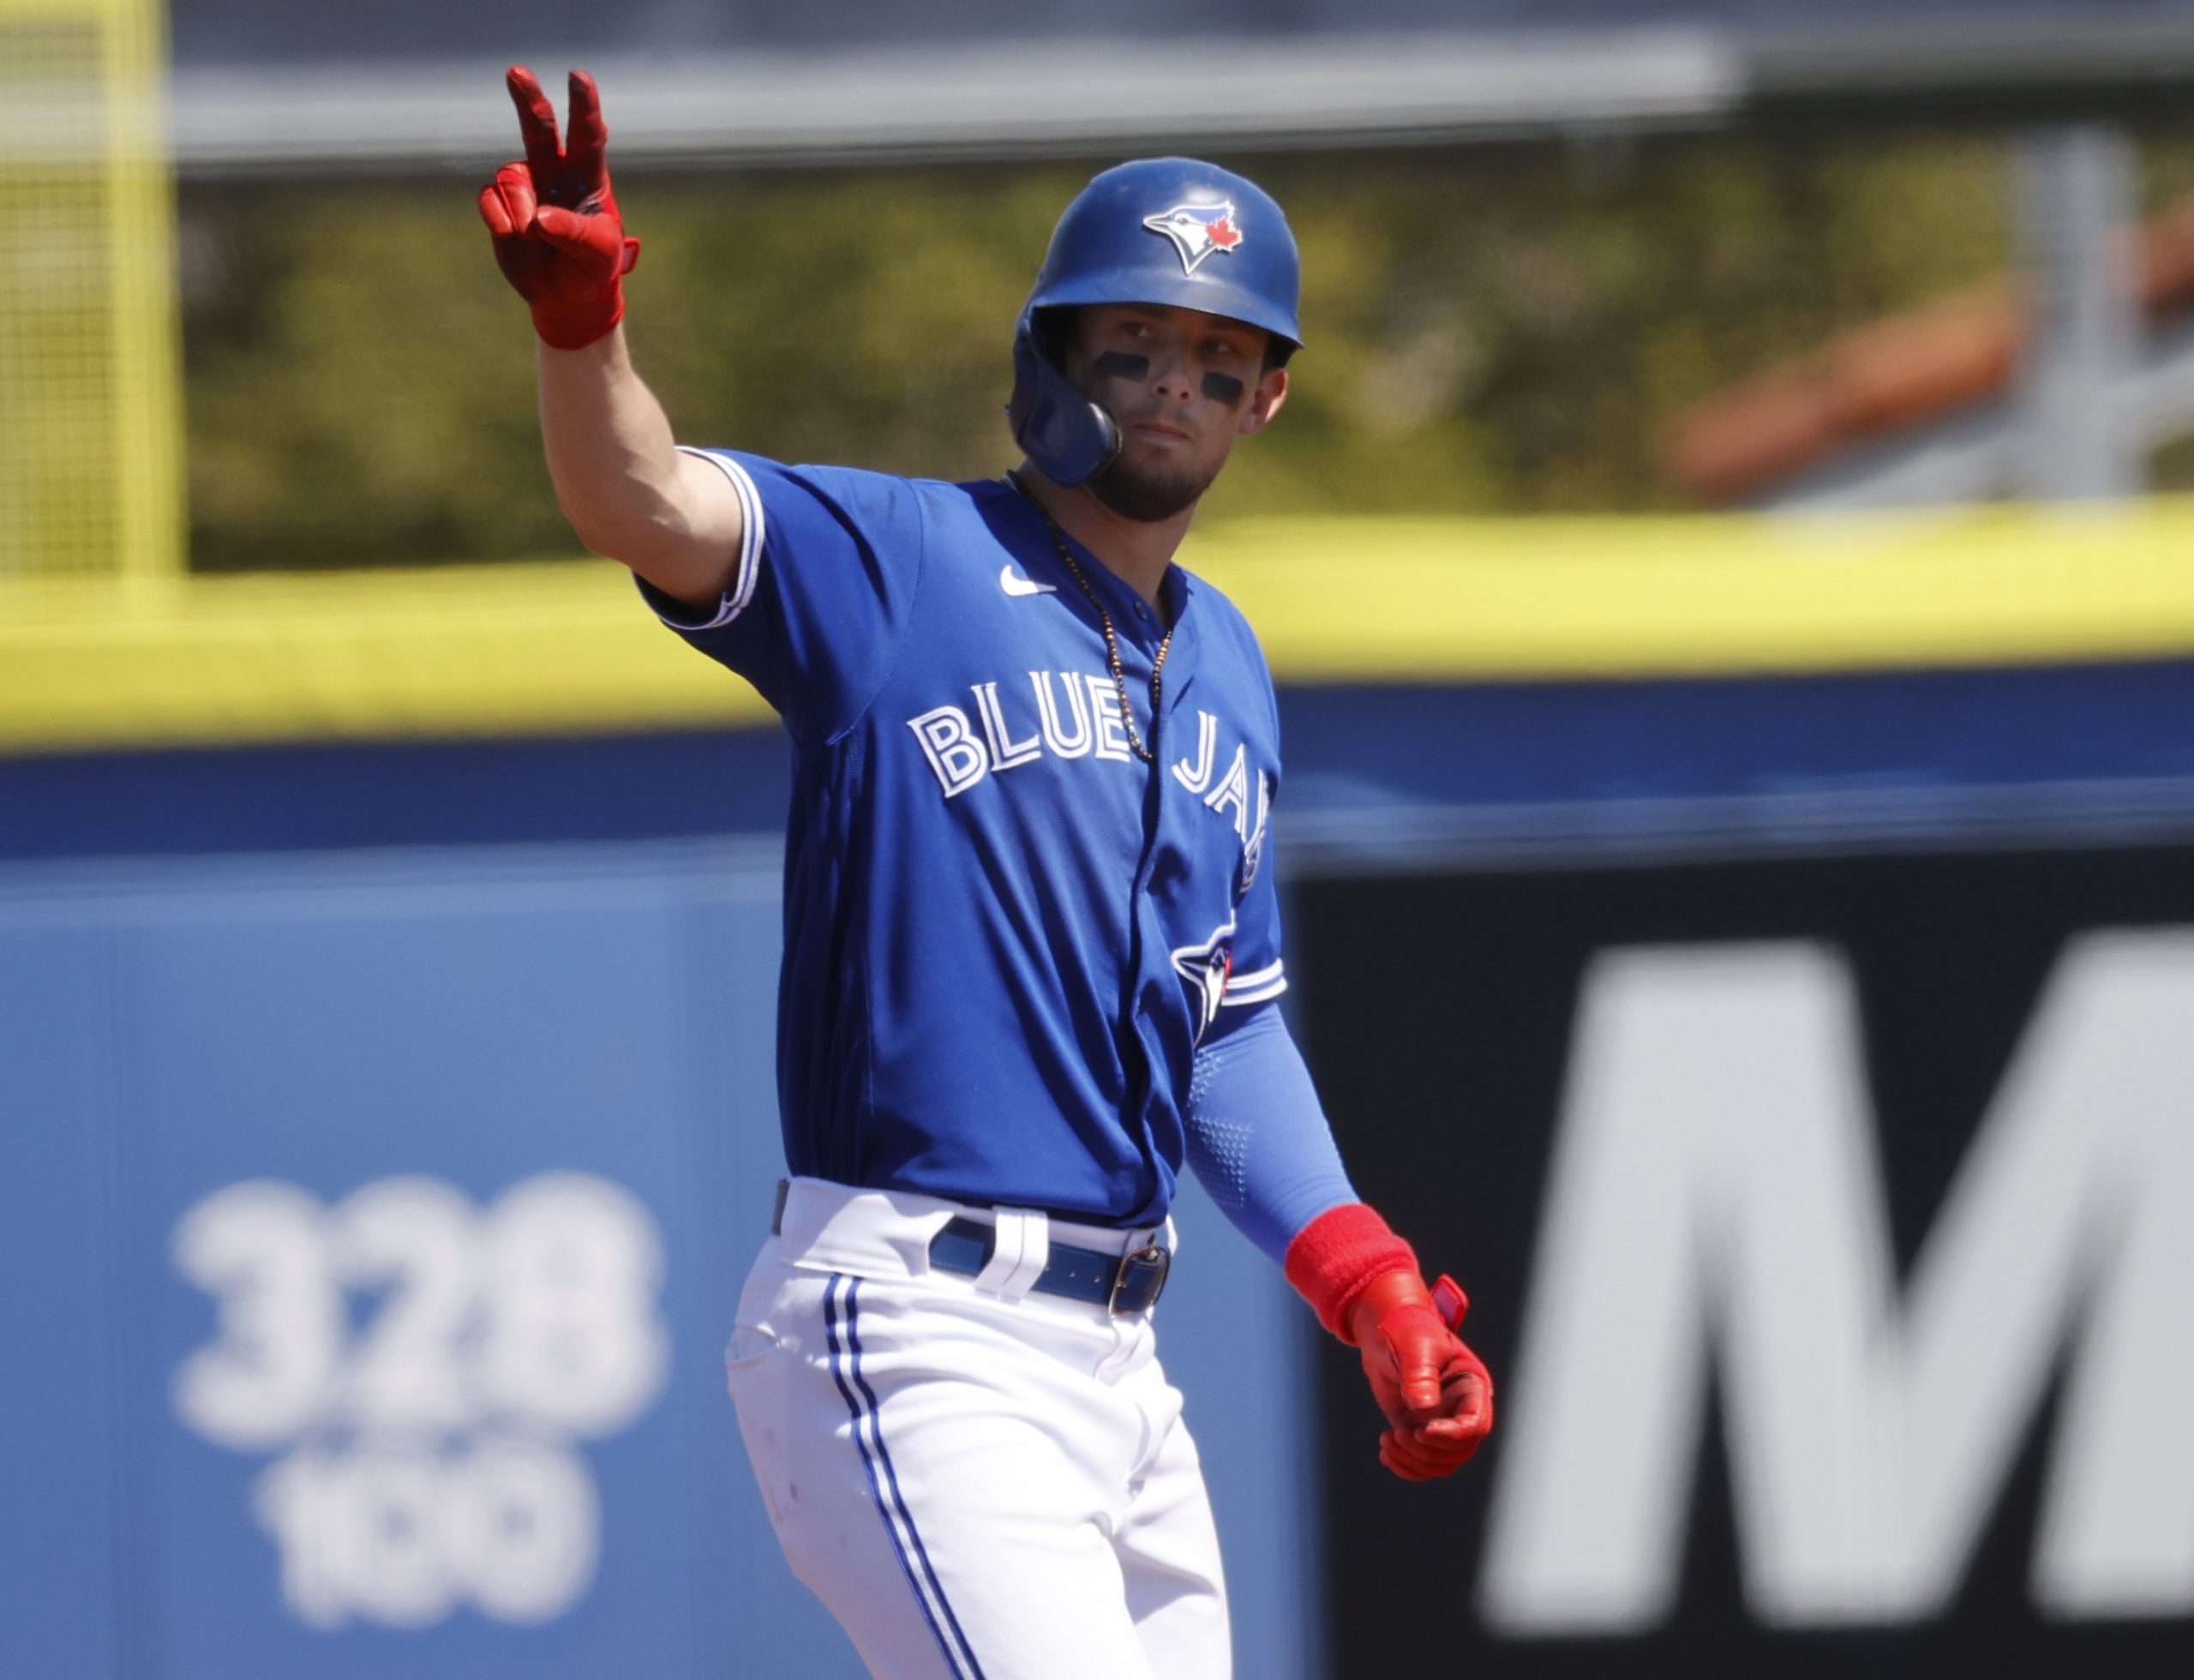 Cavan Biggio may finally be playing his way out of a job on the Blue Jays